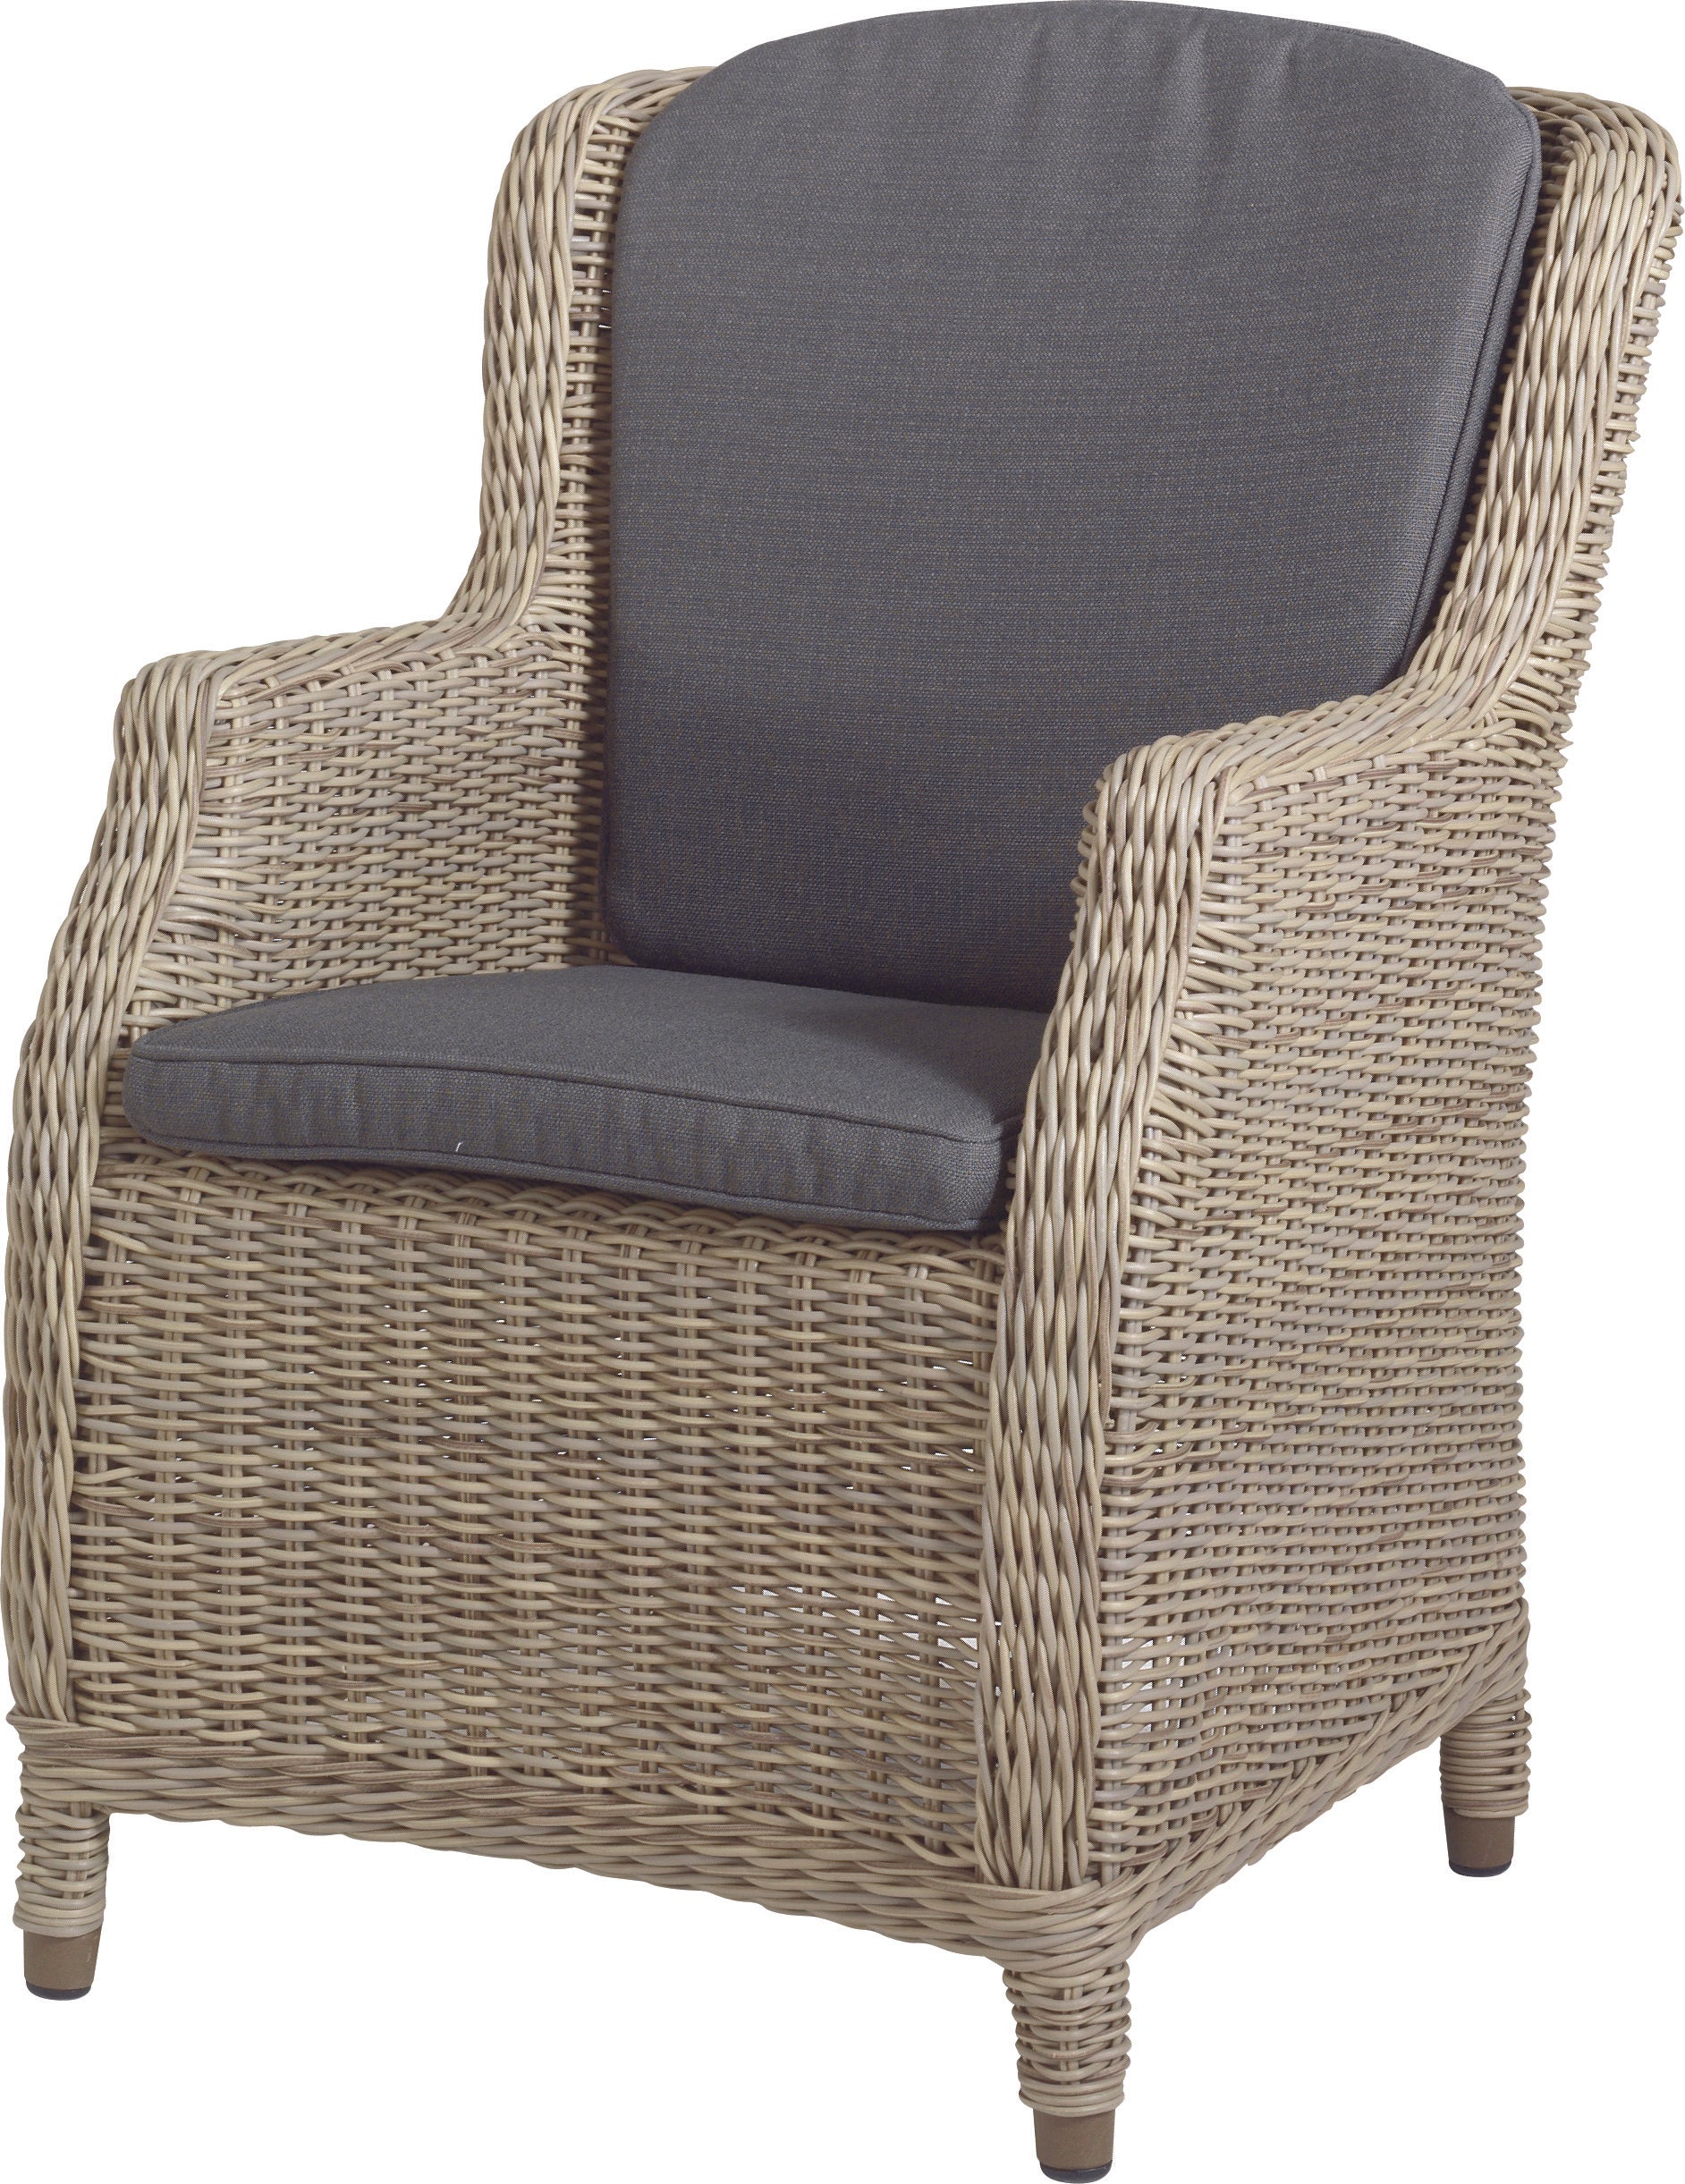 4 Seasons Outdoor Brighton Dining Chair With 2 Cushions